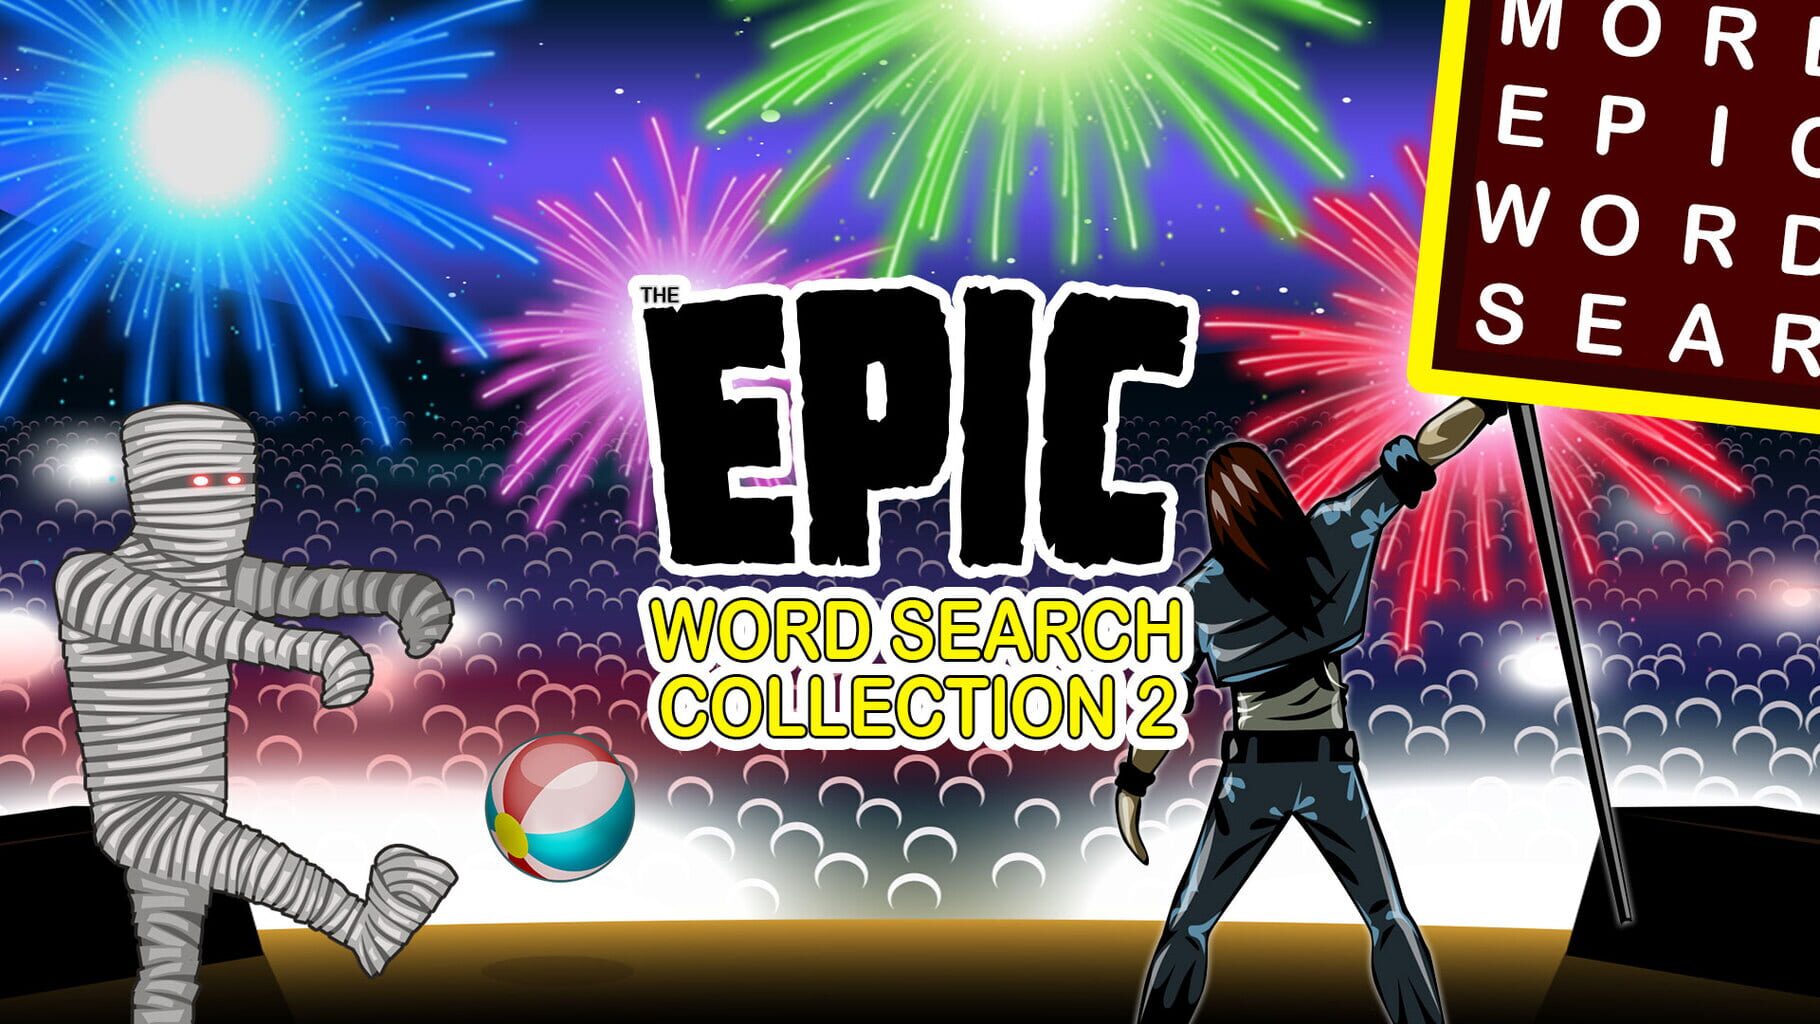 Epic Word Search Collection 2 artwork